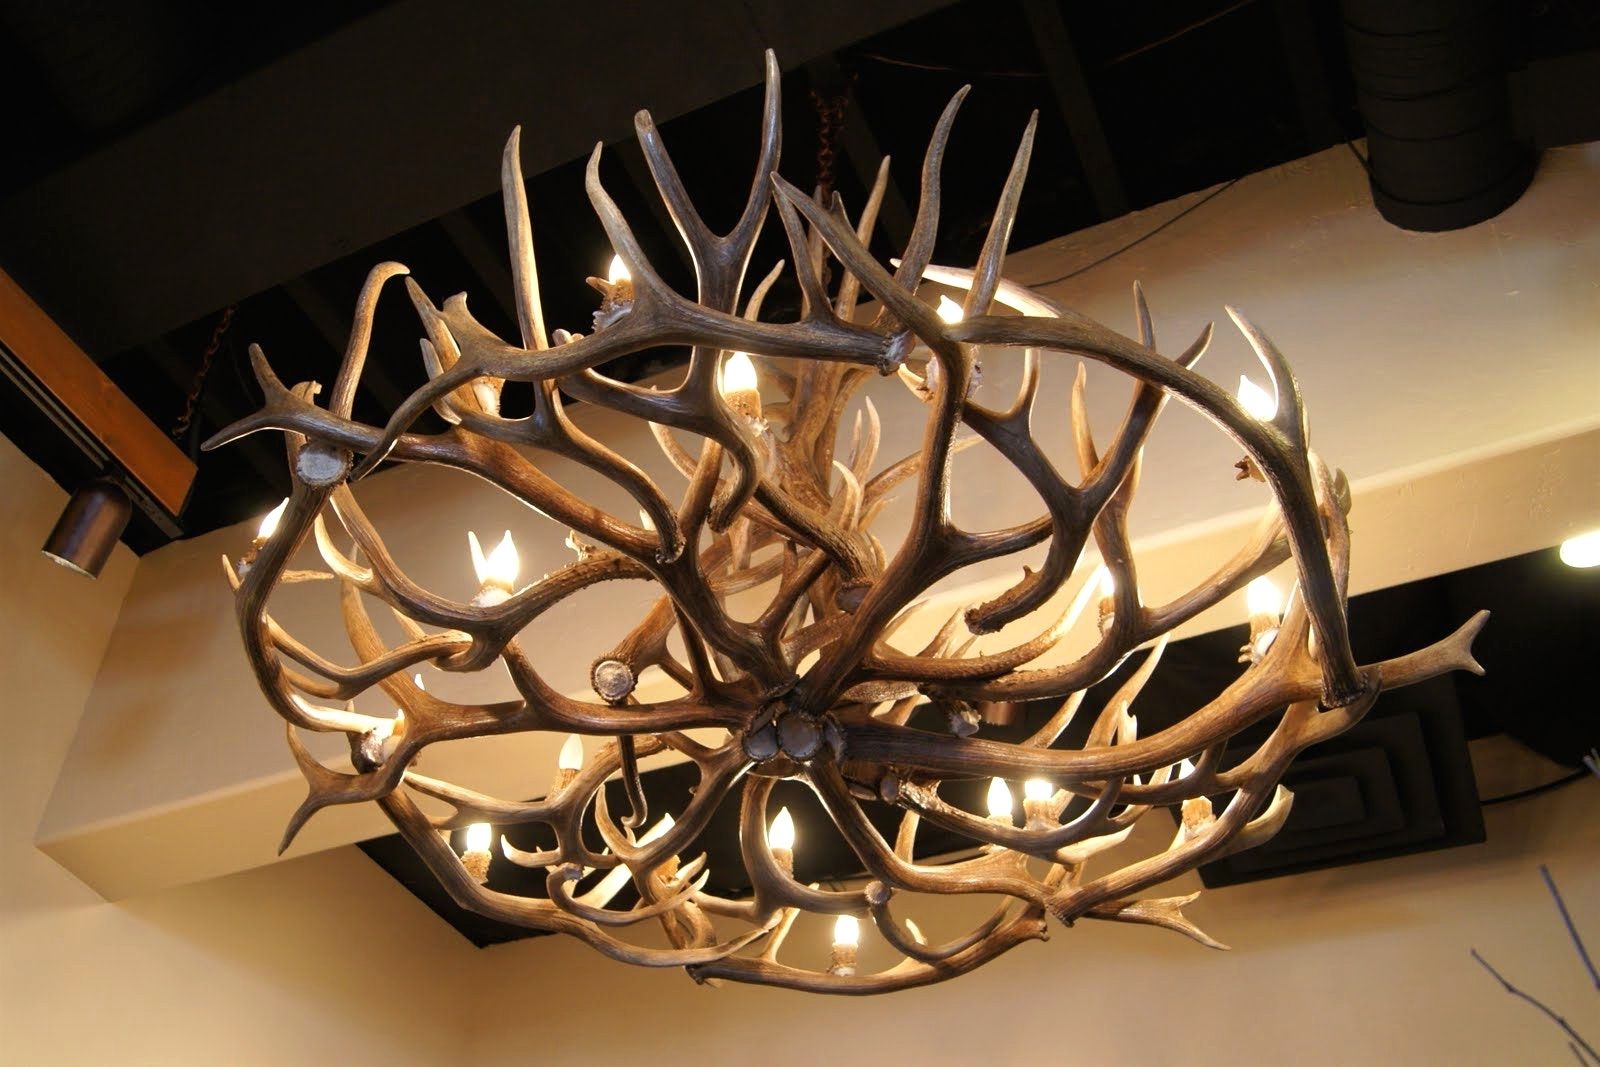 Turquoise Antler Chandeliers In Fashionable Chandeliers Design : Fabulous Unique Antler Chandelier Wonderful (View 4 of 20)